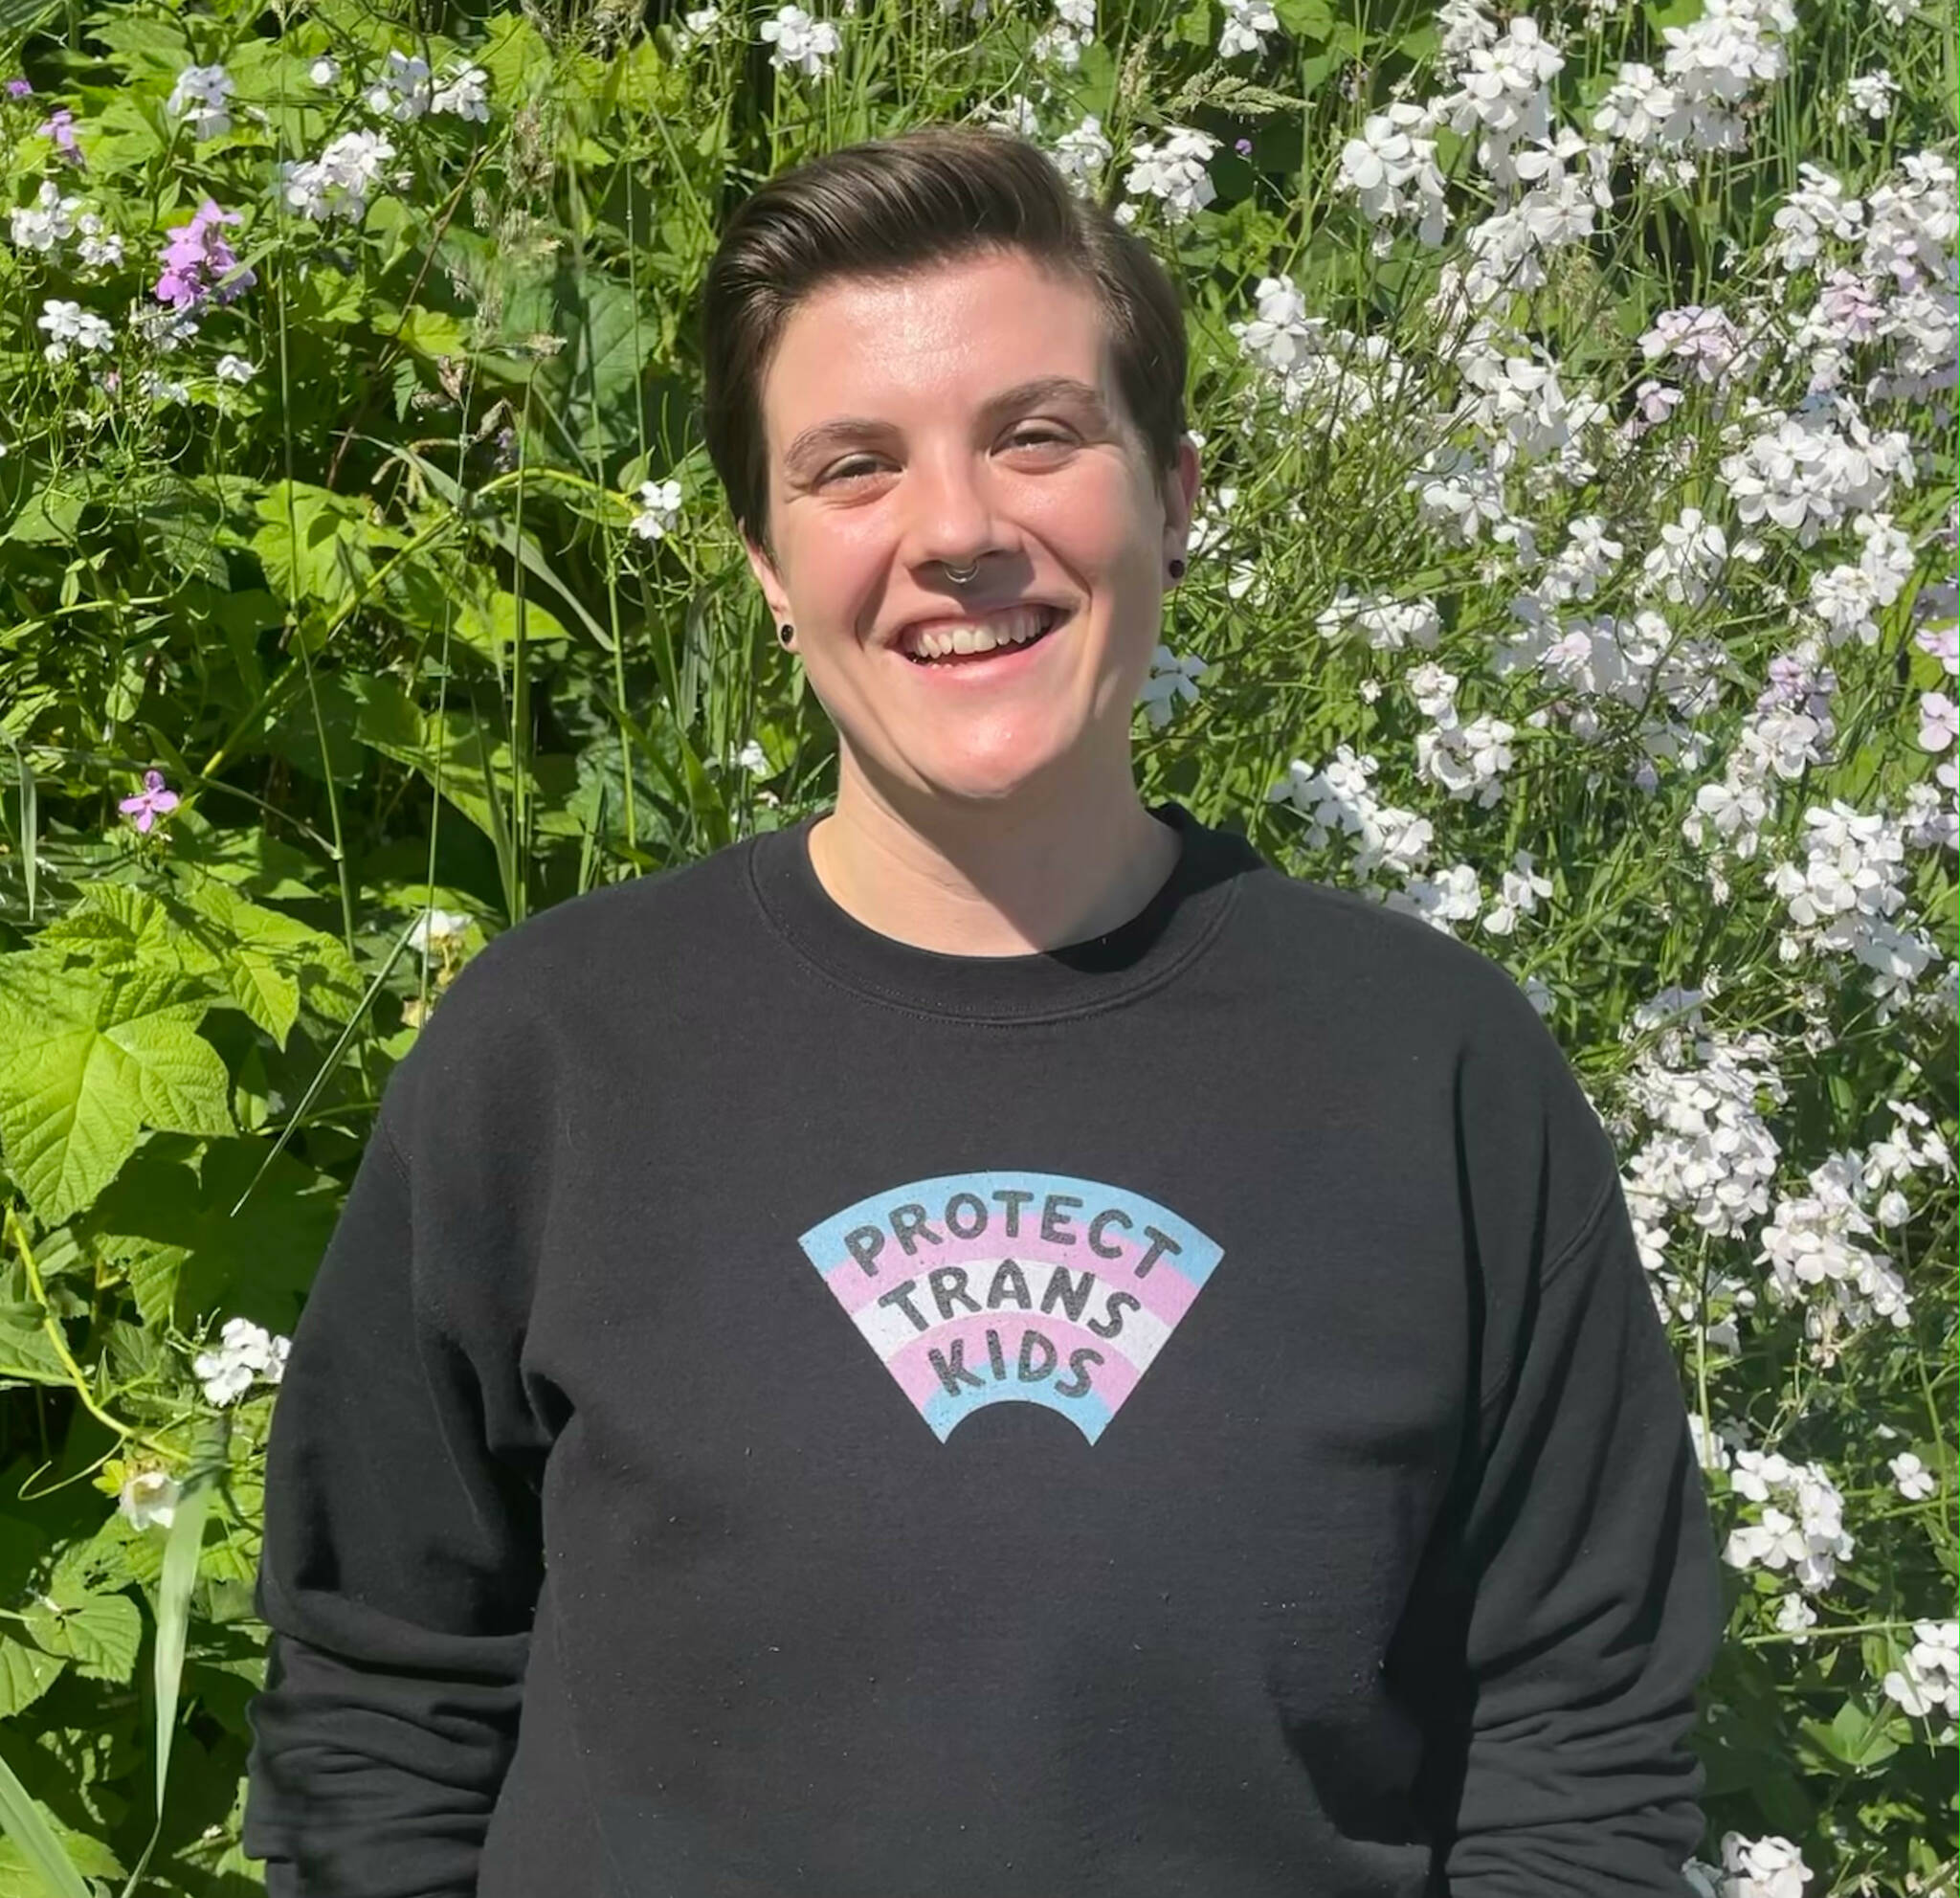 Meryl Connelly-Chew is being awarded the Southeast Alaska LGBTQ+ Alliance’s Mildred Boesser Equal Rights Award on Sunday. (Courtesy photo / Meryl Connelly-Chew)